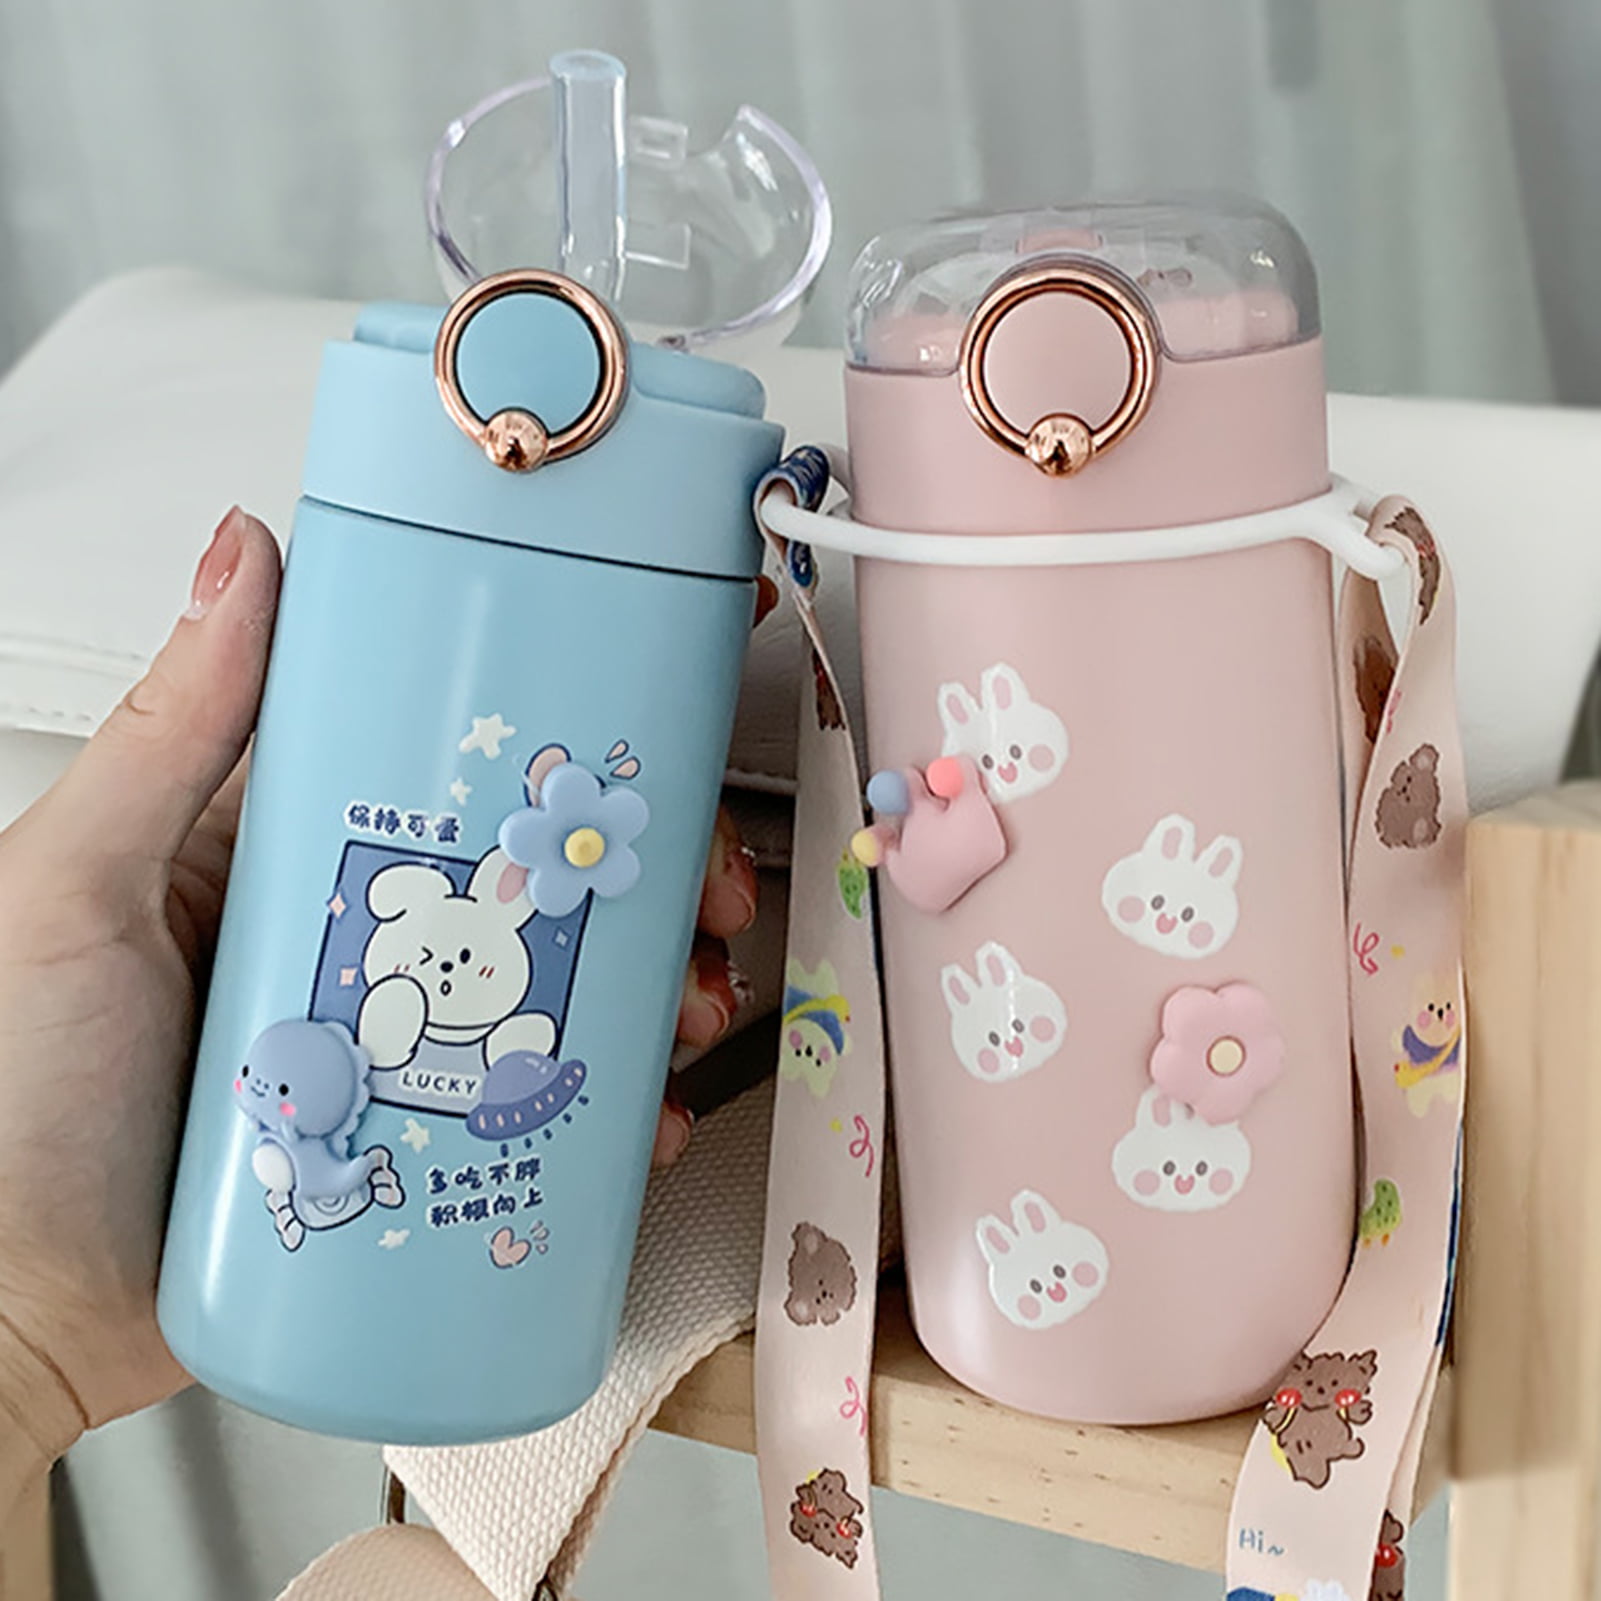 Hesroicy Adjustable Shoulder Strap Sippy Cup - Easy to Carry, Cute